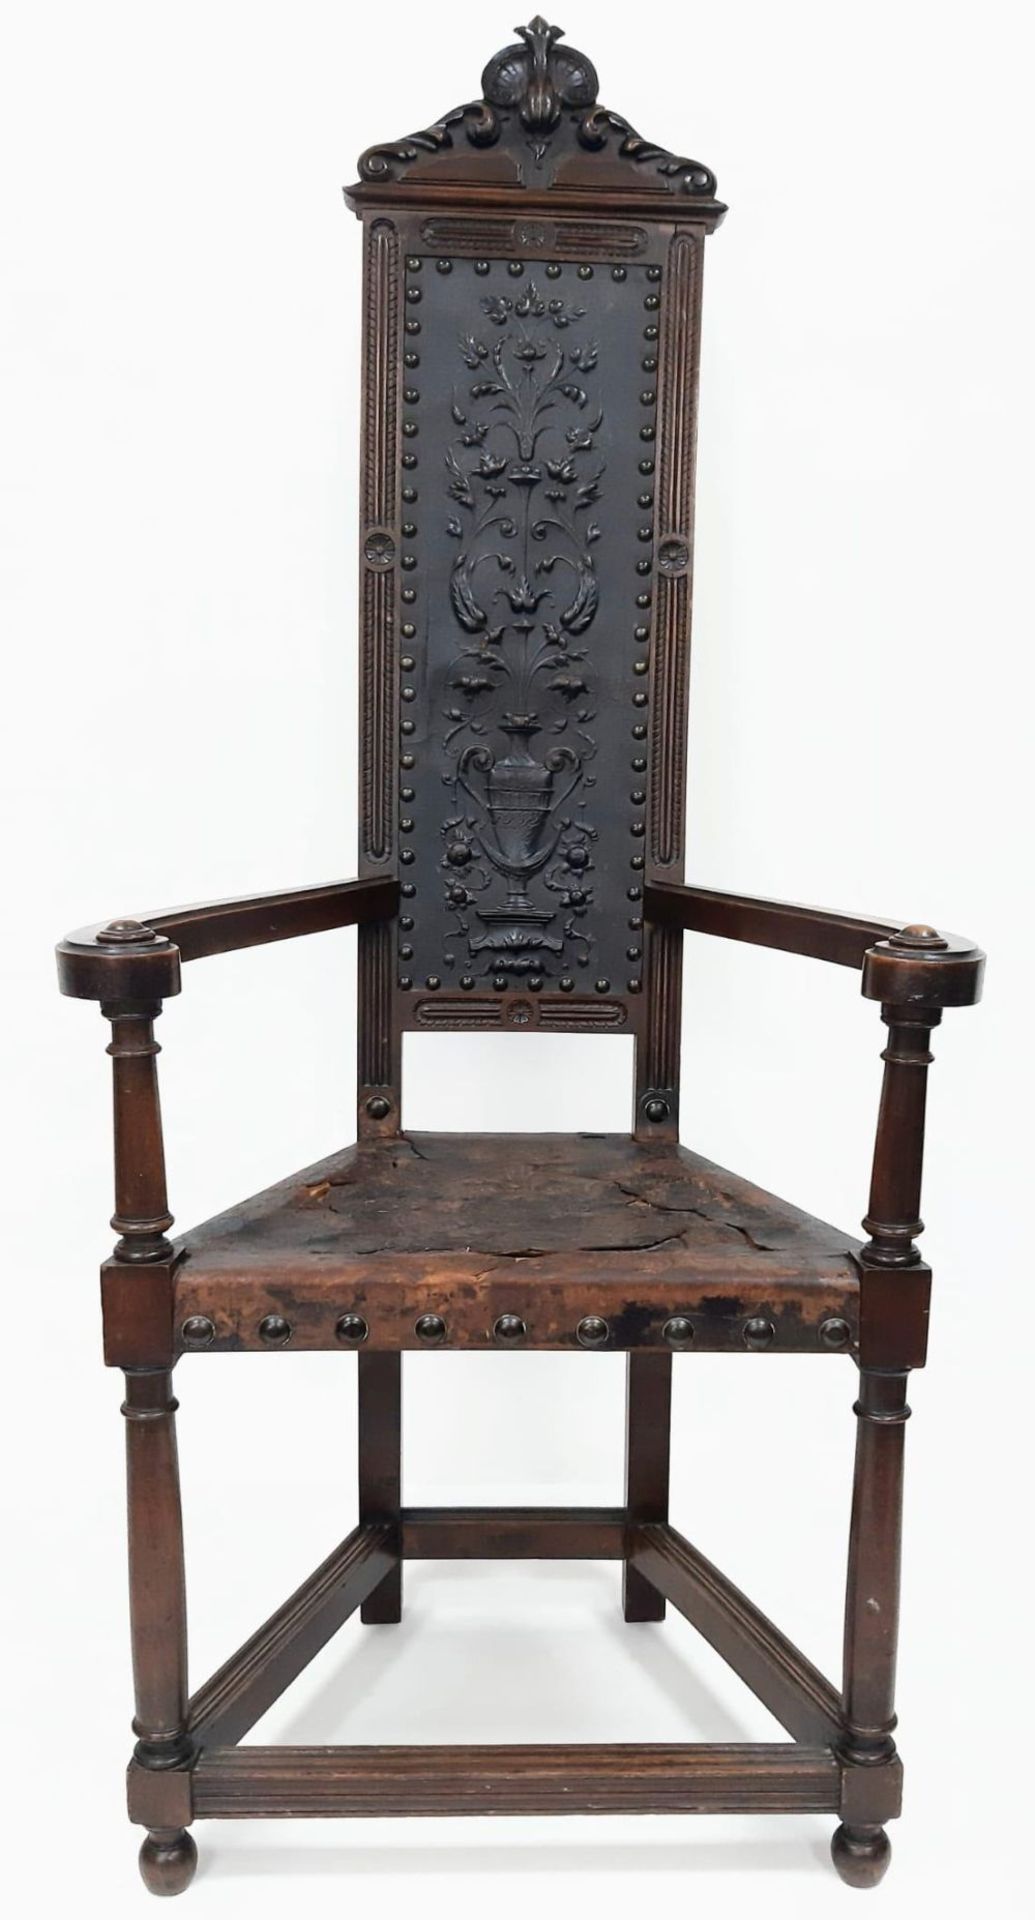 A unique and unusual 18/19th Century Caquetoire Chair. Derived from 'caqueter', a French term